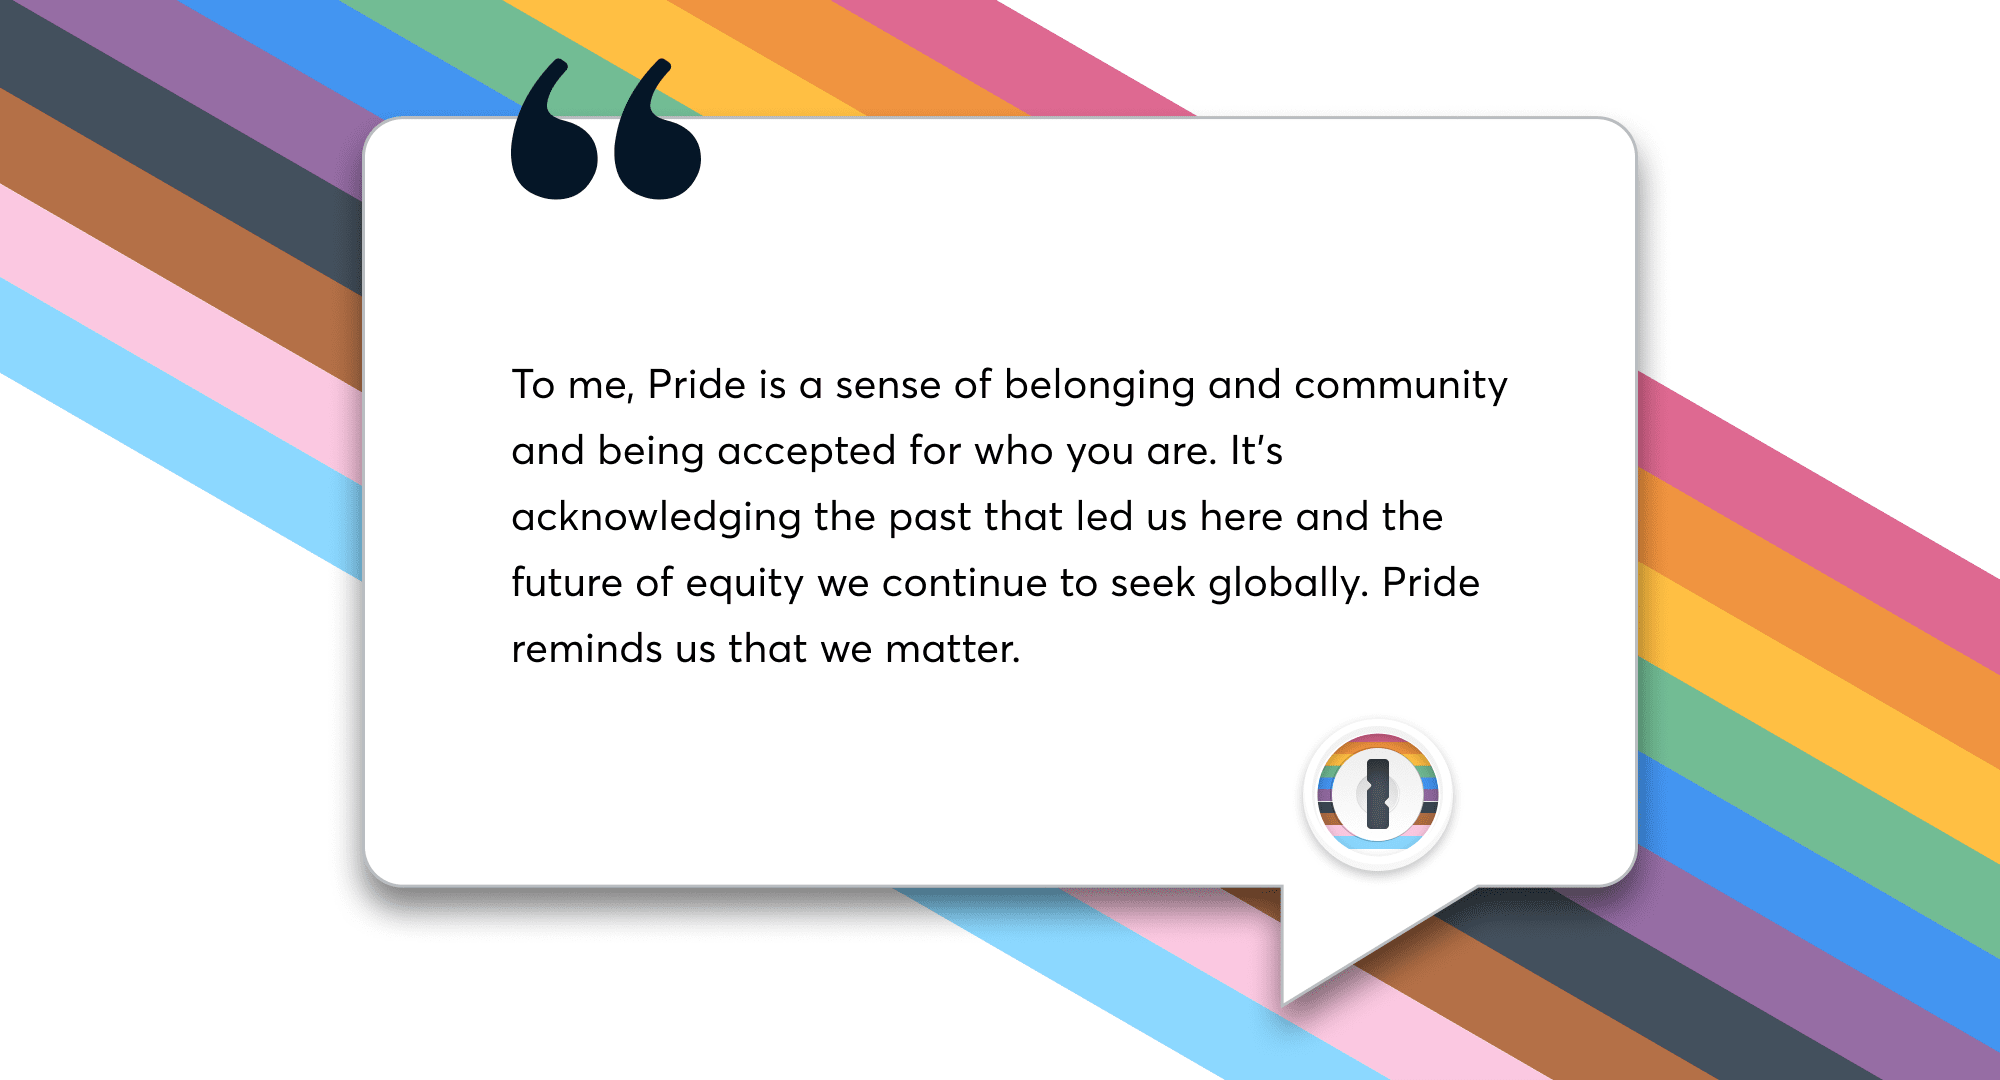 A quote from a 1Password team member that says, To me, Pride is a sense of belonging and being accepted for who you are.It's acknowledging the past that led us here and the future of equity we continue to seek globally. Pride reminds us that we matter.